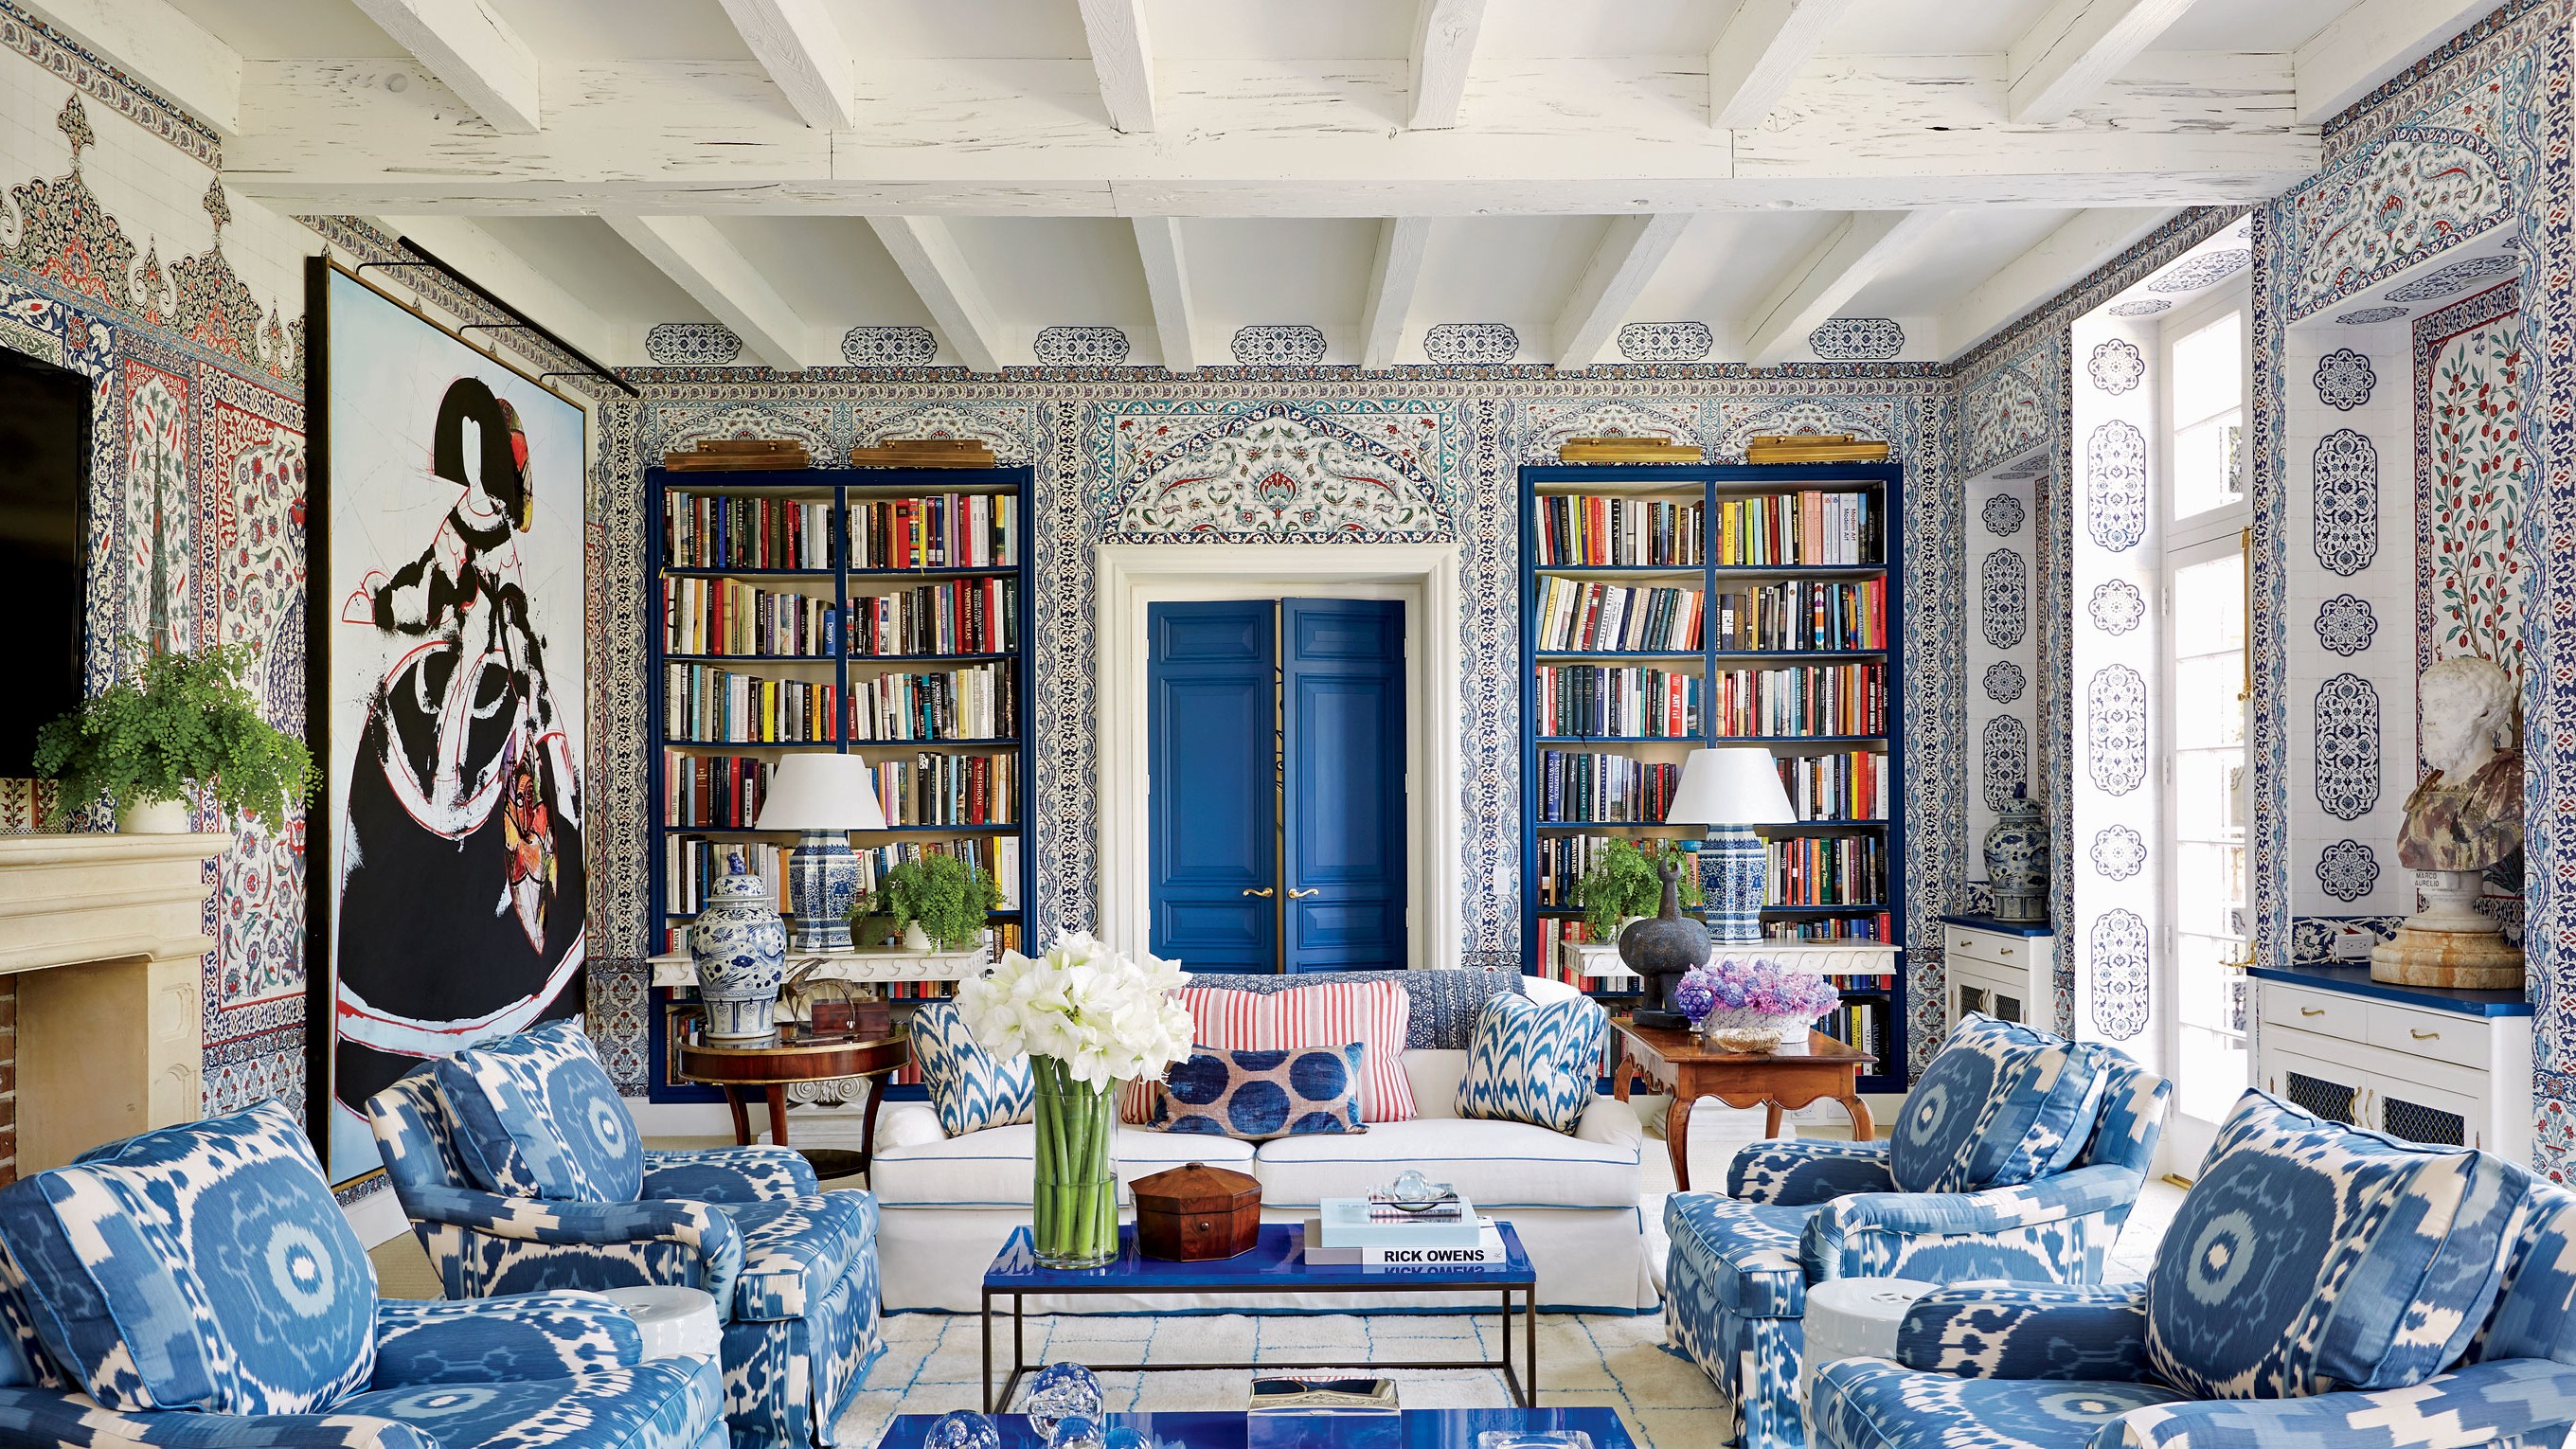 Wallpaper Ideas For Every Room Architectural Digest